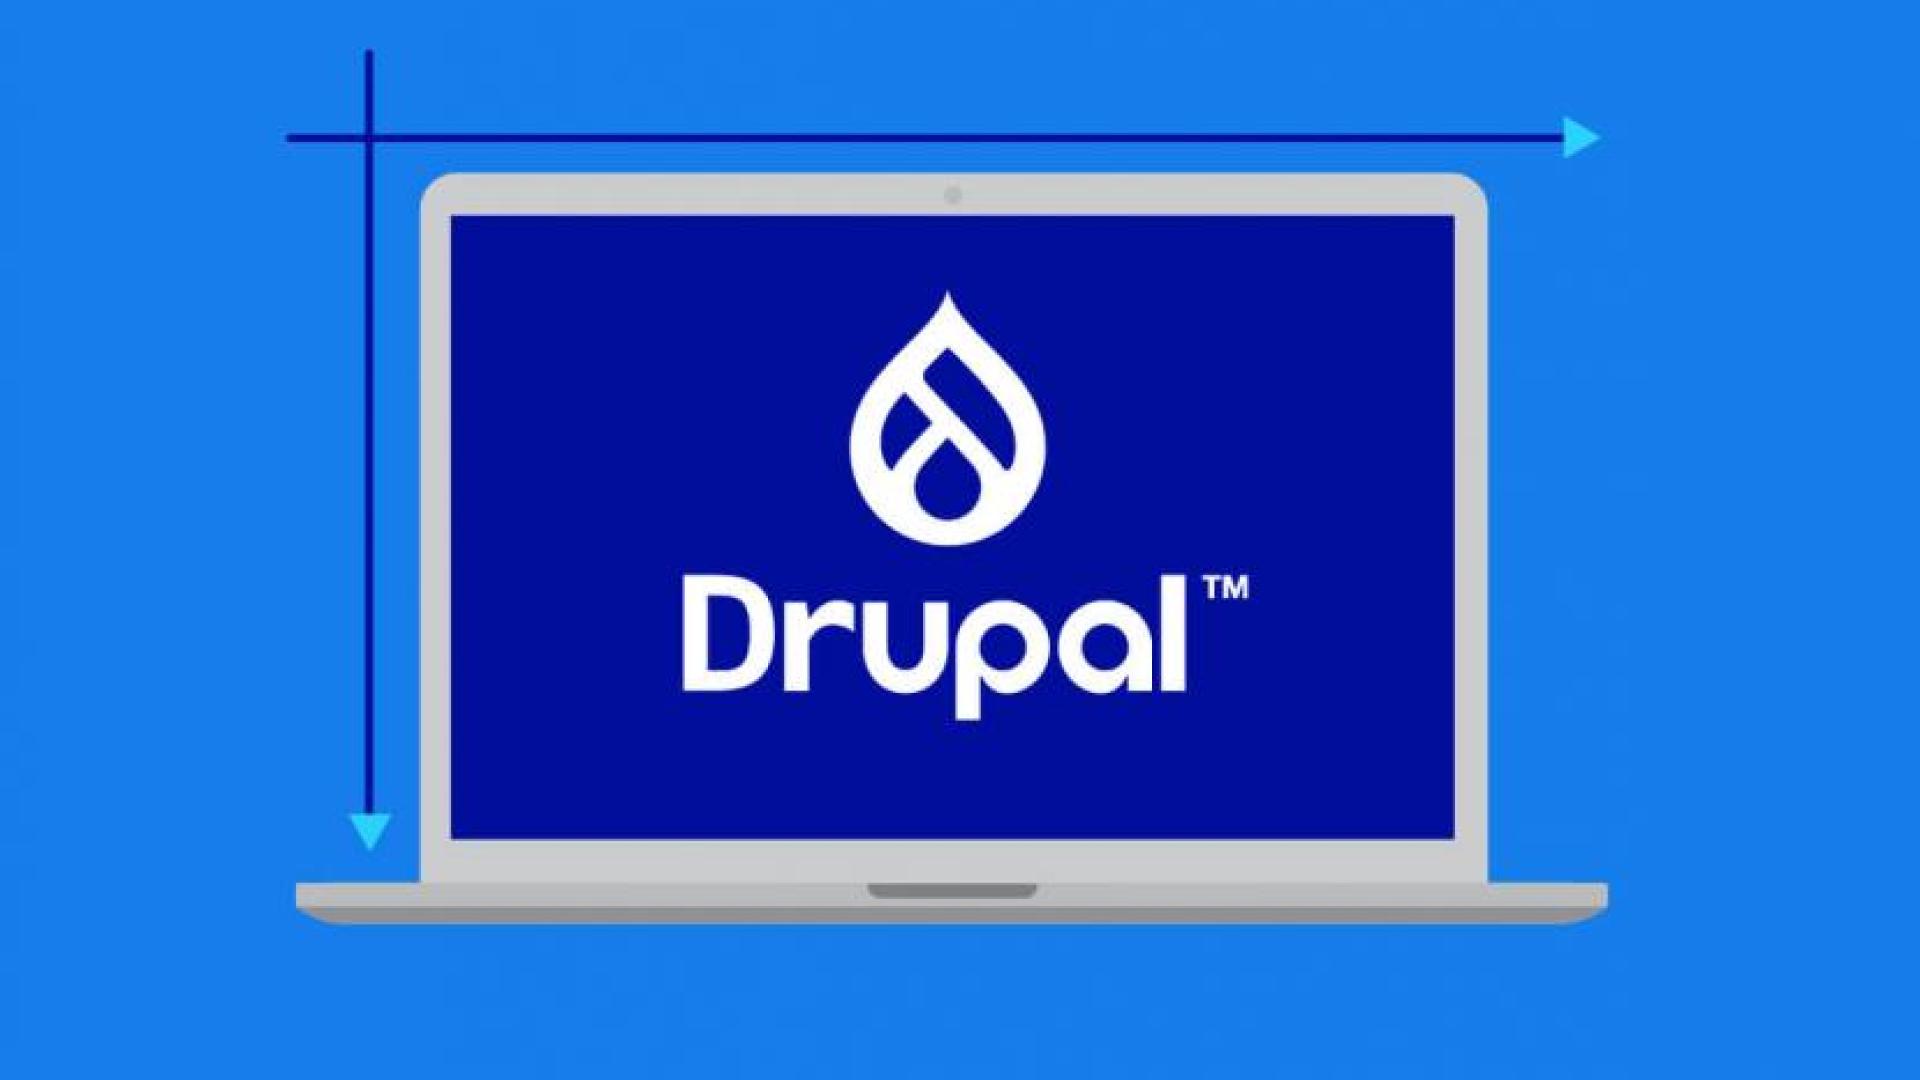 The term Drupal and its logo